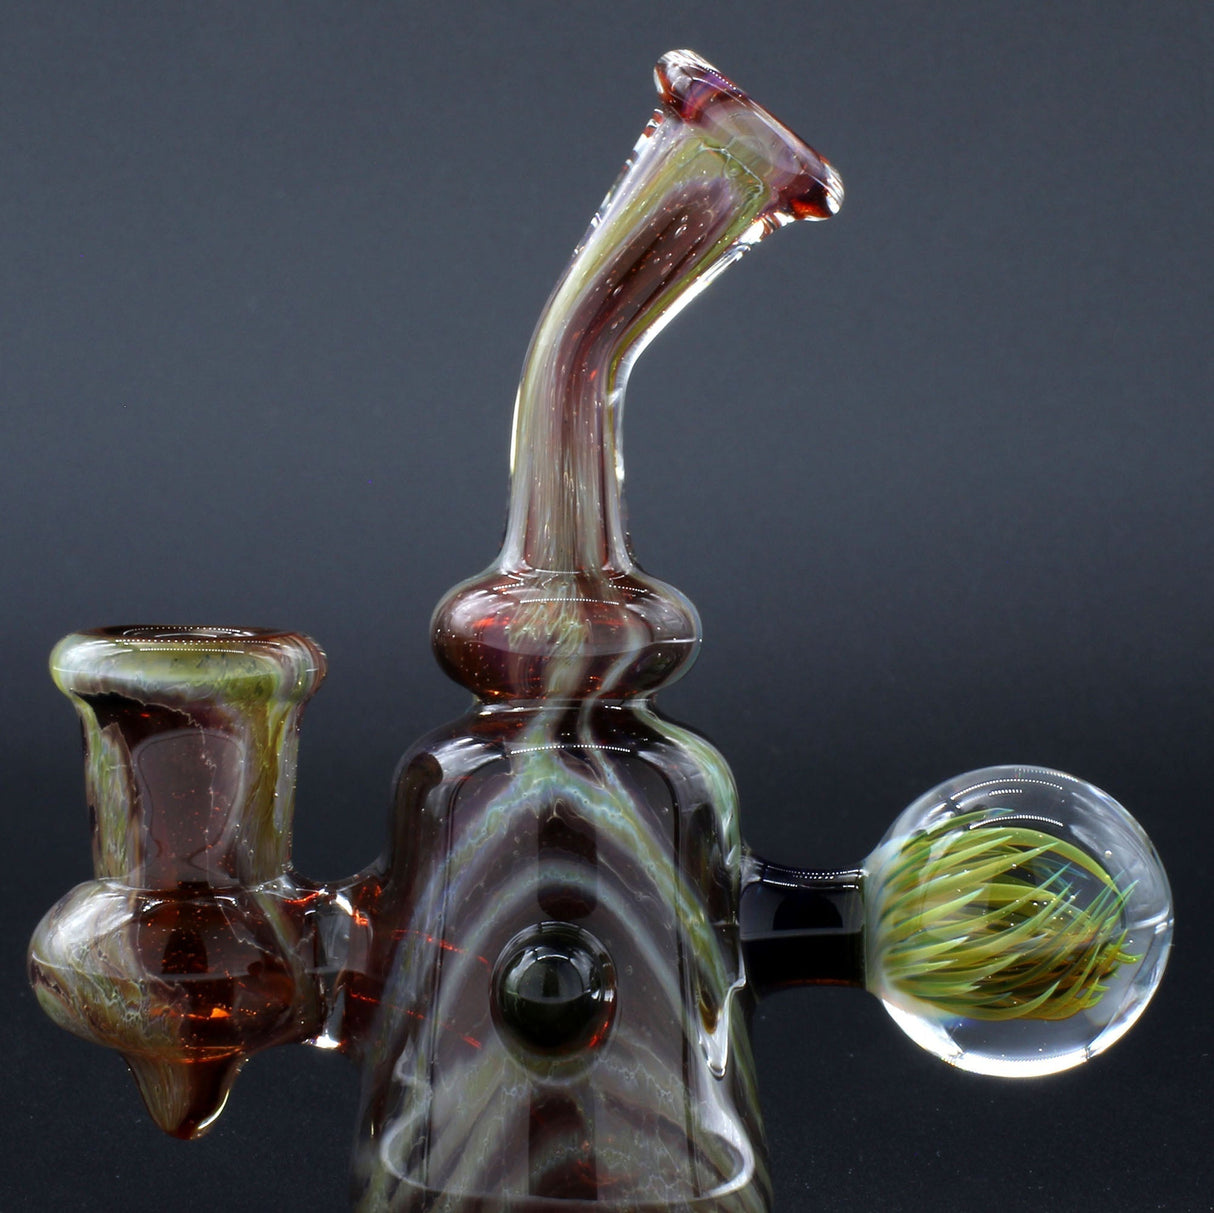 Clayball Glass "Blood Moon" Heady Sherlock Dab Rig, angled side view on black background